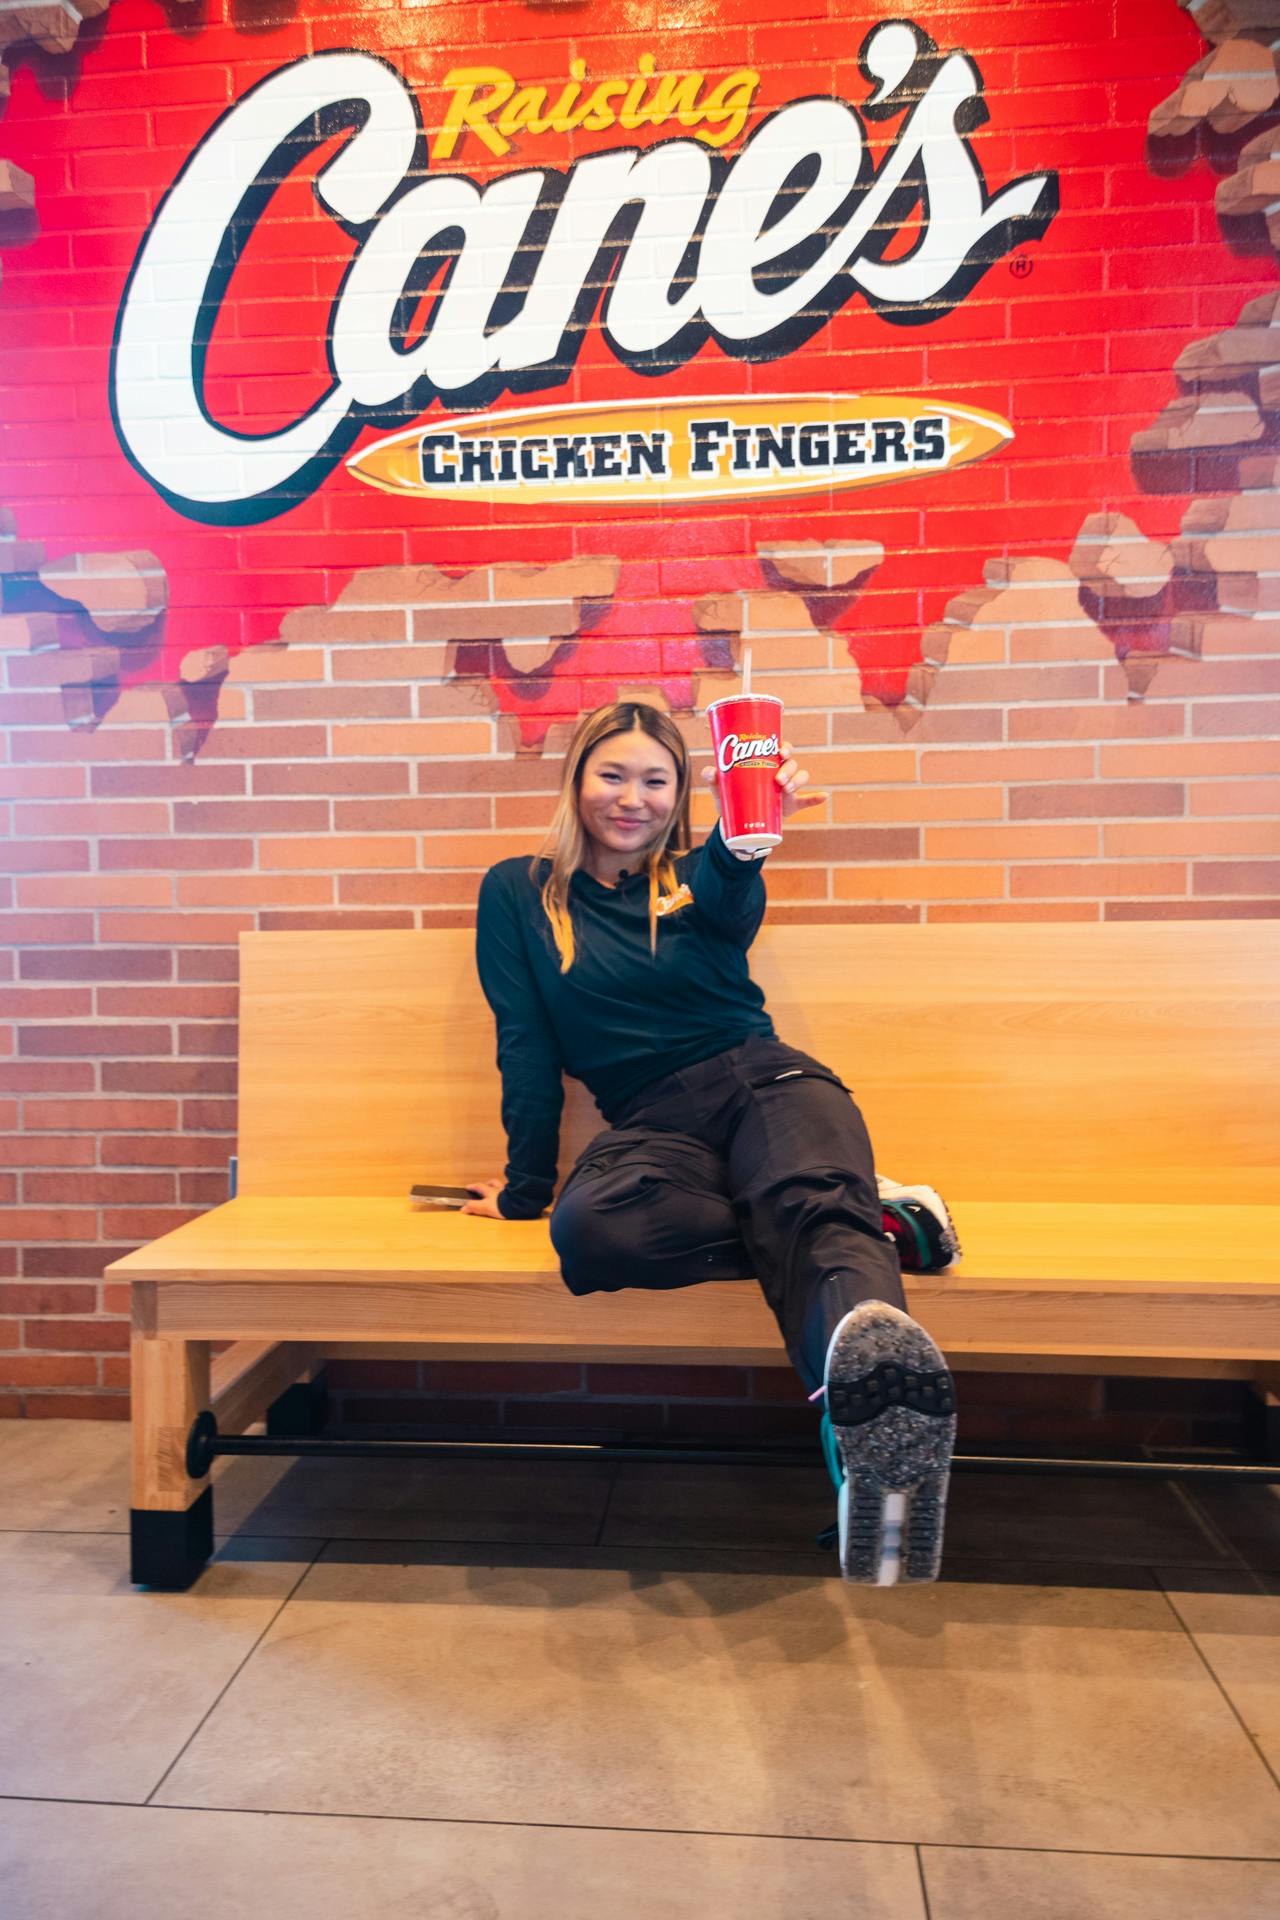 Chloe Kim sitting in front of a Raising Cane's mural